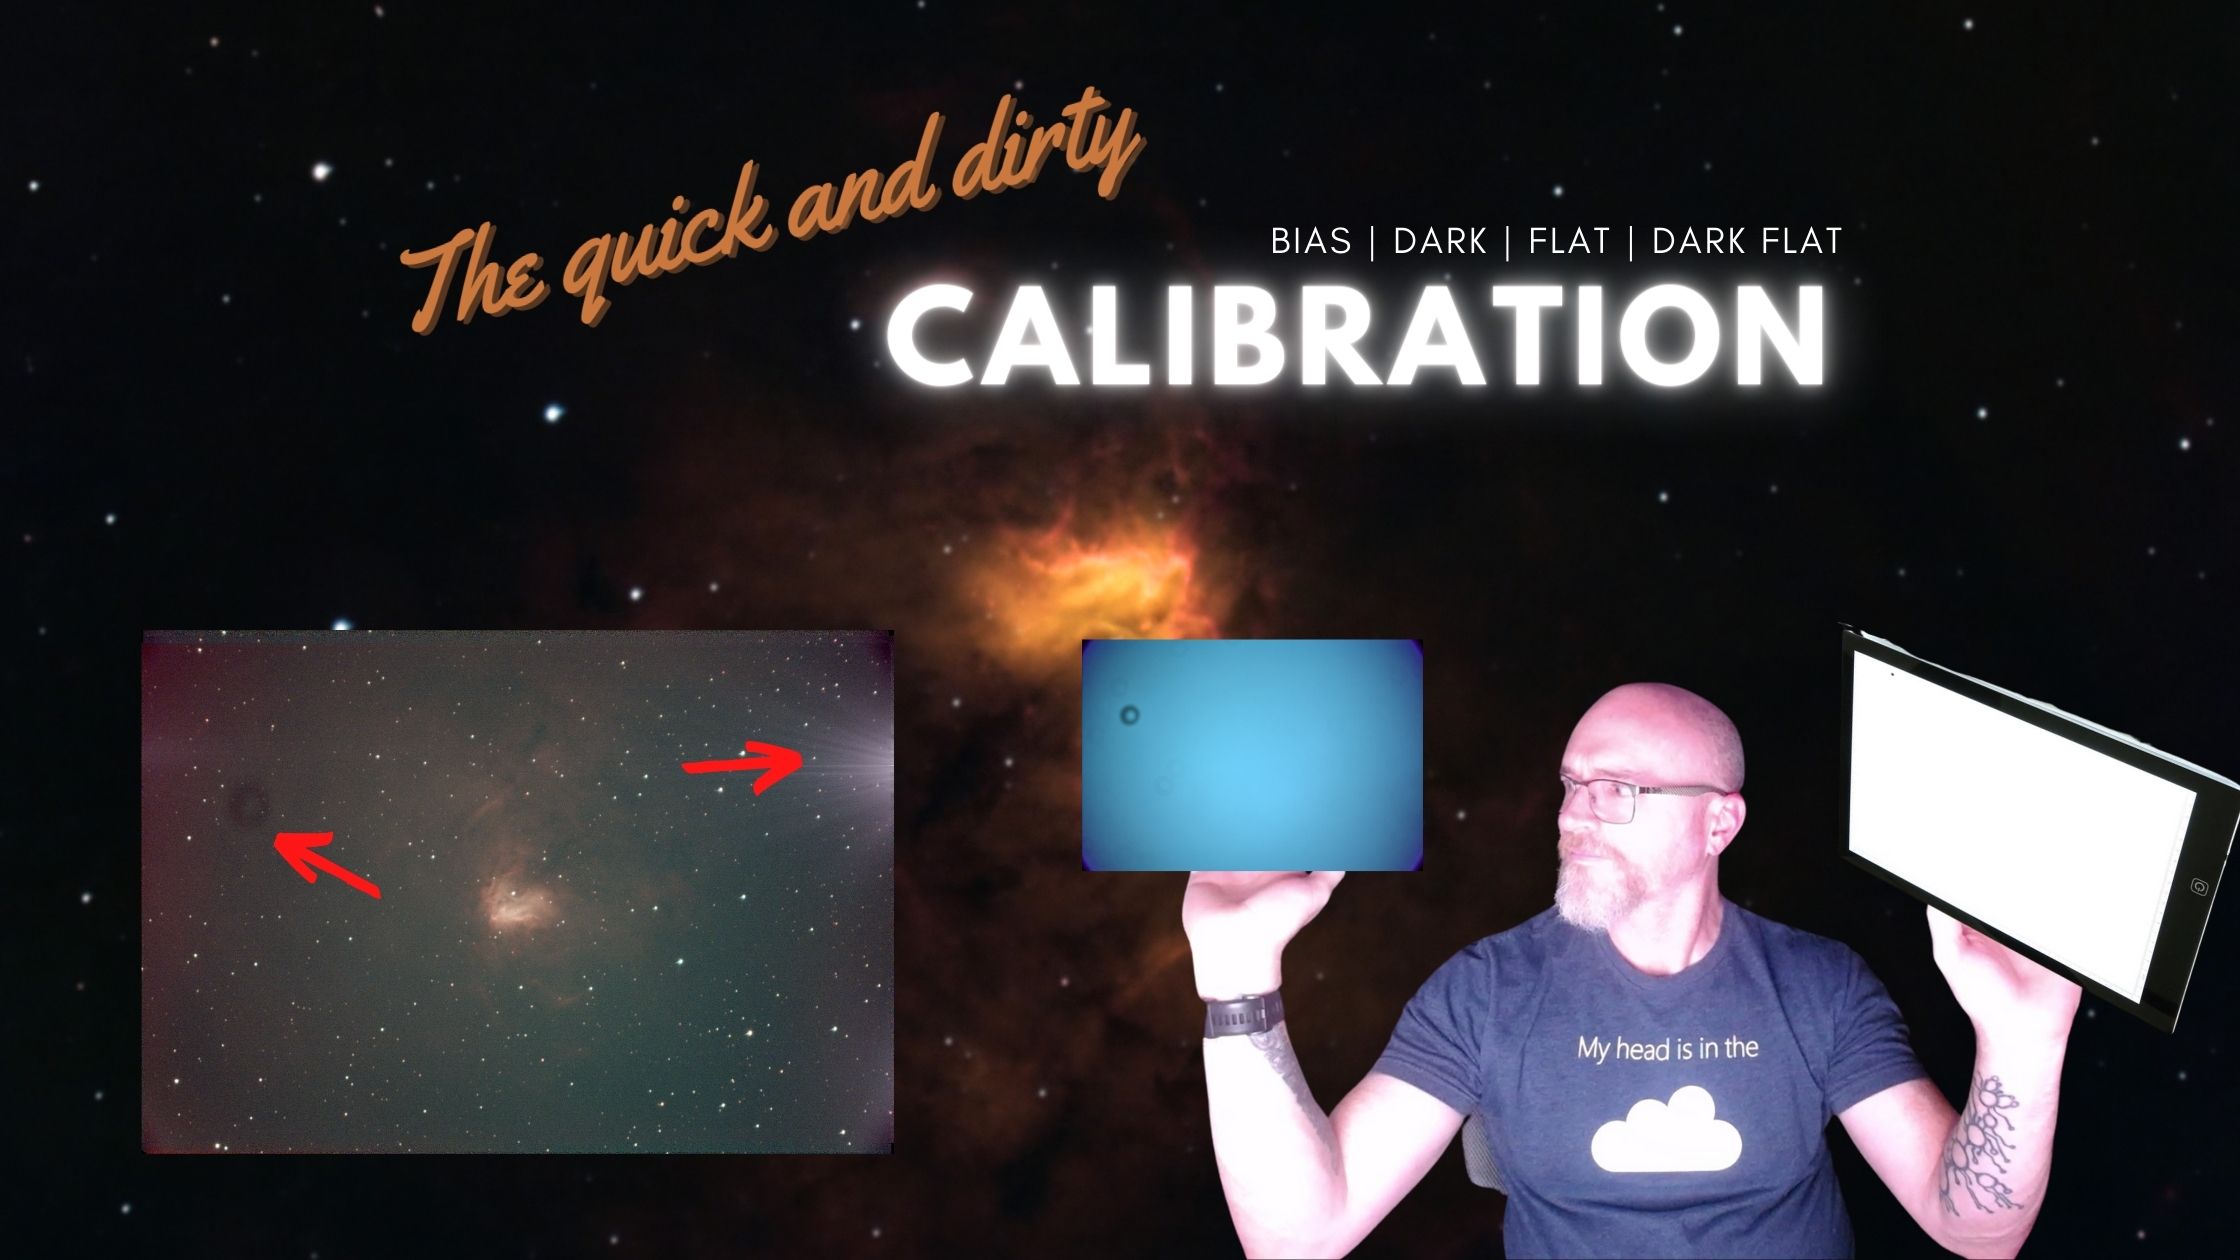 A very fast and high-level overview of what calibration frames are in astrophotography, why you care, and how you can get started. Includes a hands-on example with real photographs to show differences.